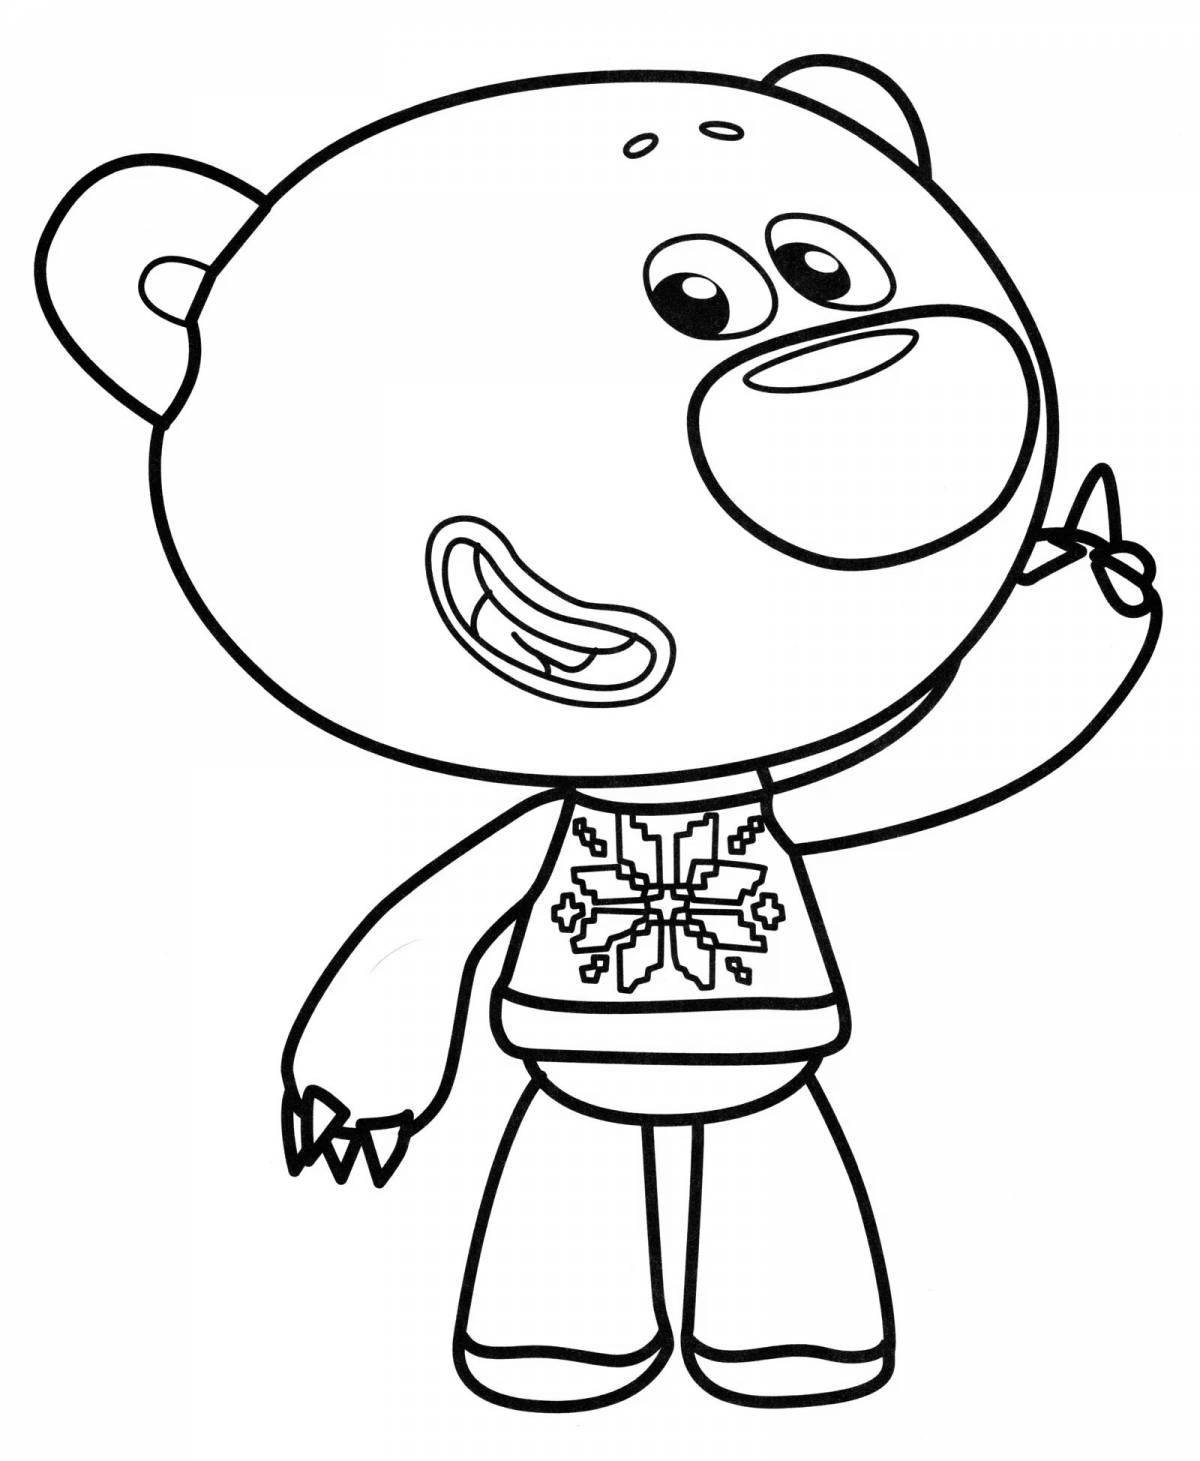 Imitation coloring pages